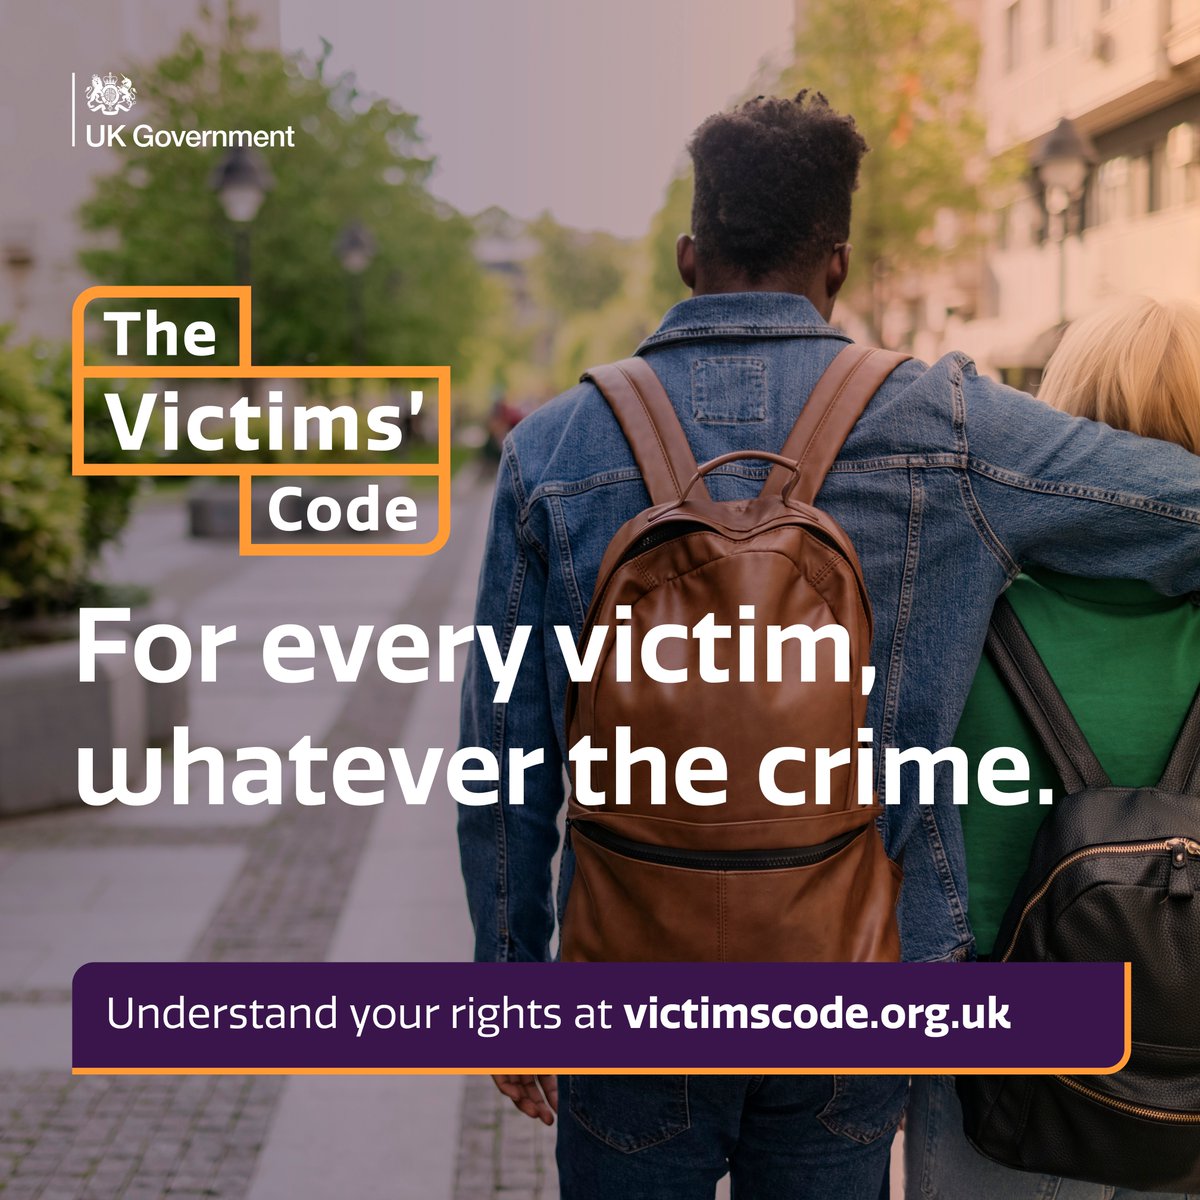 If you’ve experienced a crime, you have the right to be informed about the criminal justice process and the support available.

The #VictimsCode explains the rights that everyone can expect to receive as a victim of crime.

➡️Understand your rights at orlo.uk/nrZBa